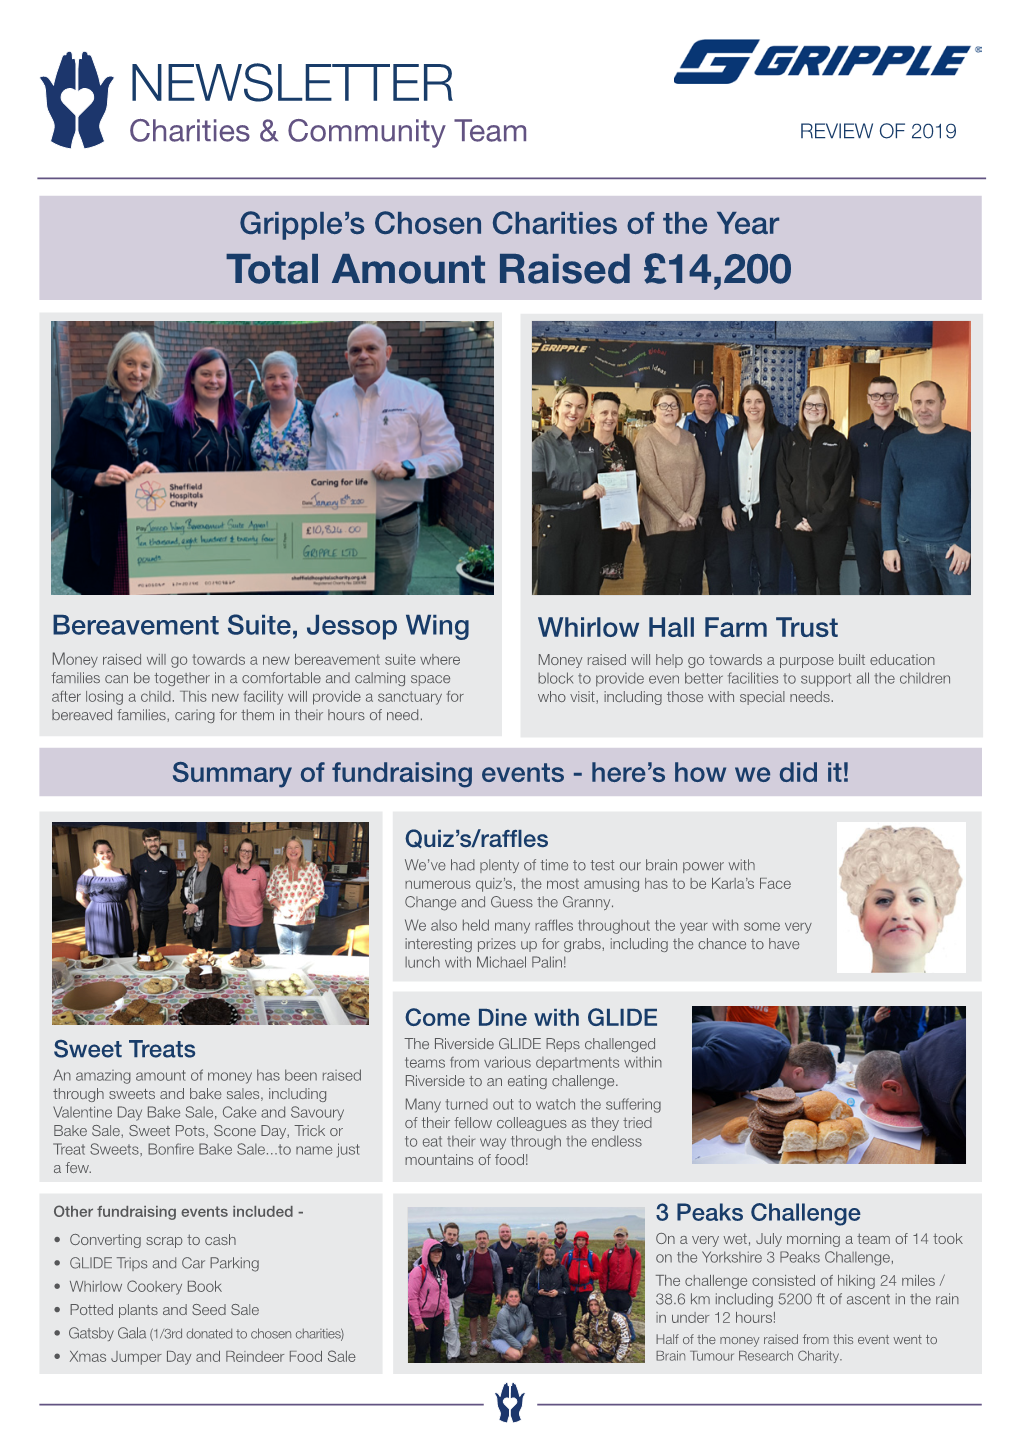 NEWSLETTER Charities & Community Team REVIEW of 2019